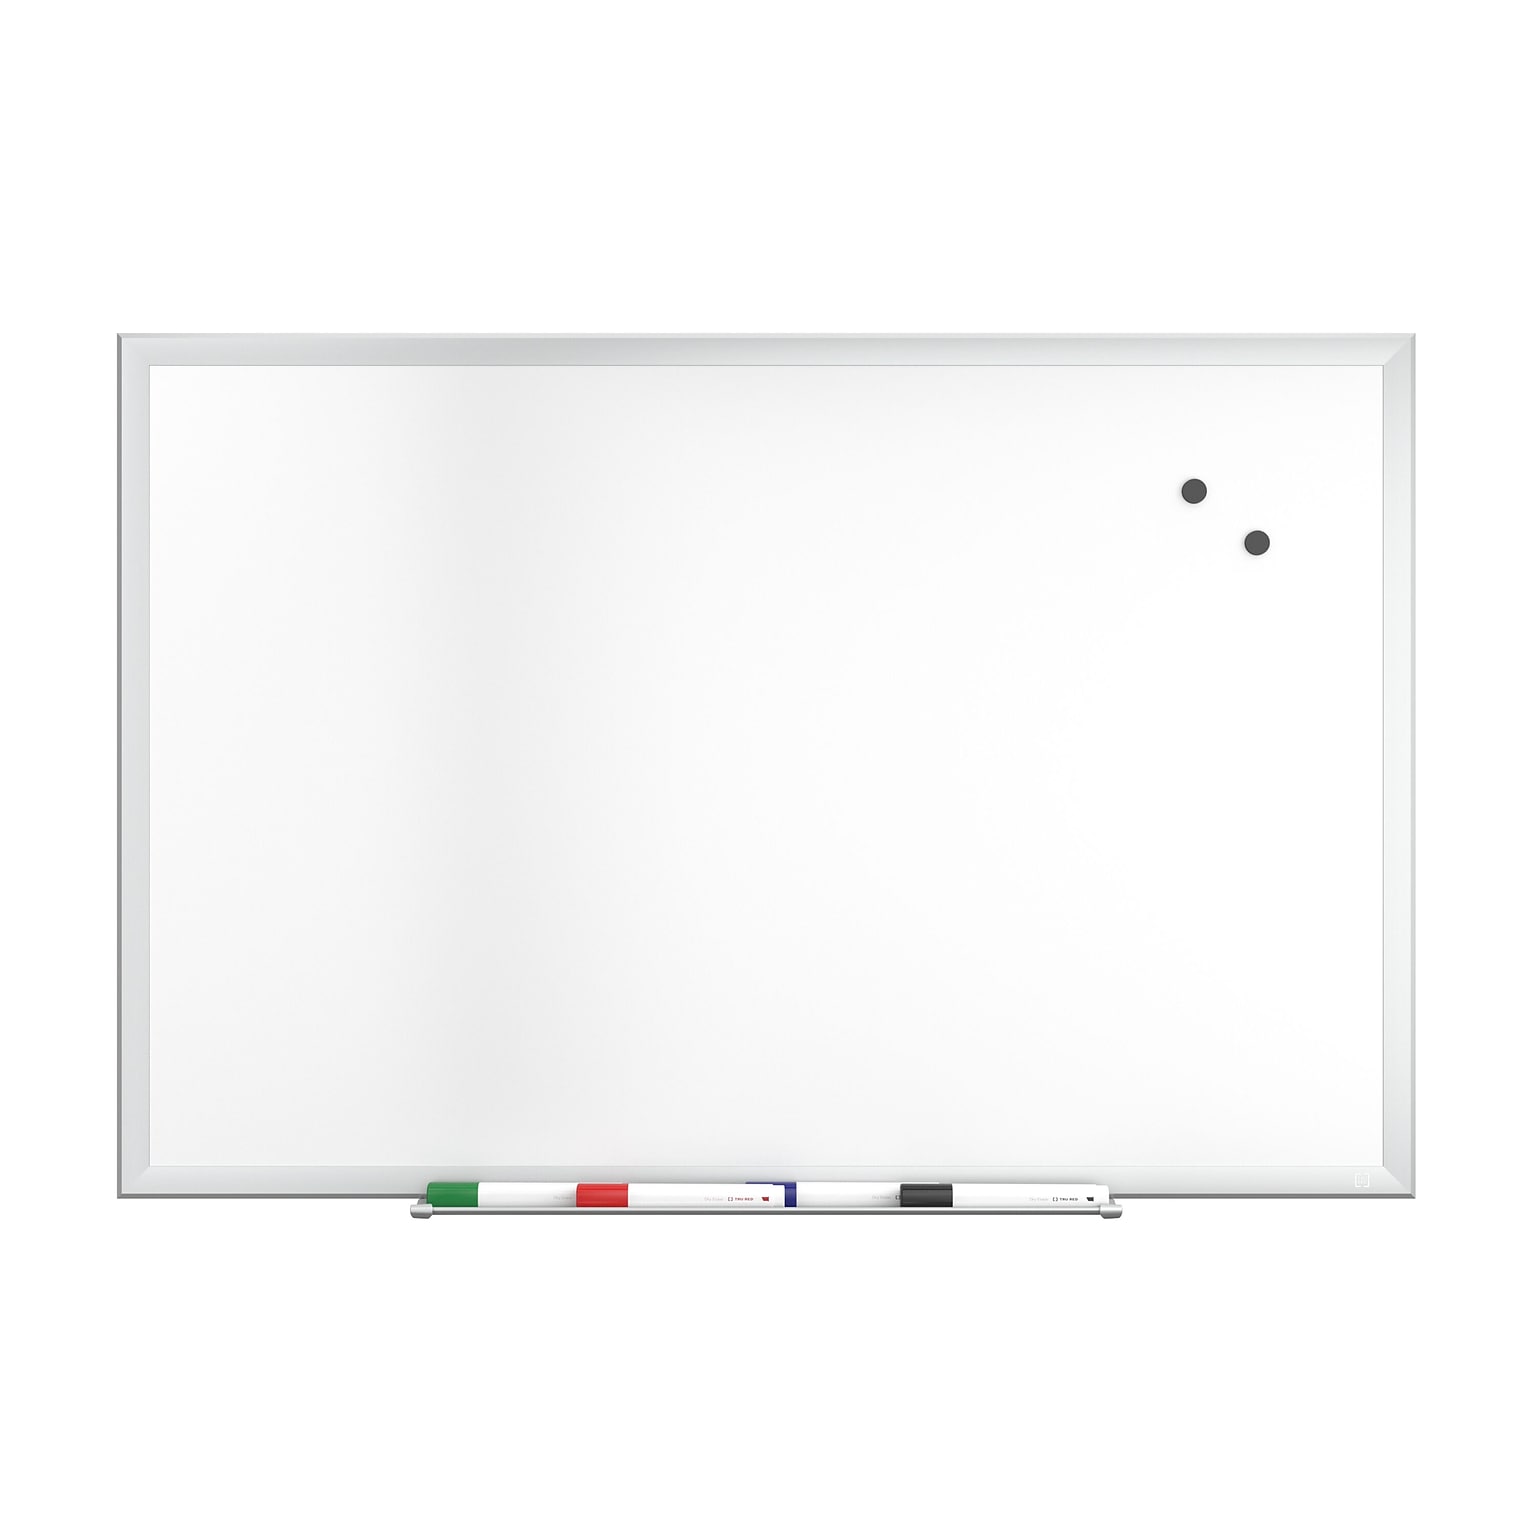 3' x 2' TRU RED Magnetic Steel Dry Erase Board (Satin Frame) $27 + Free Shipping